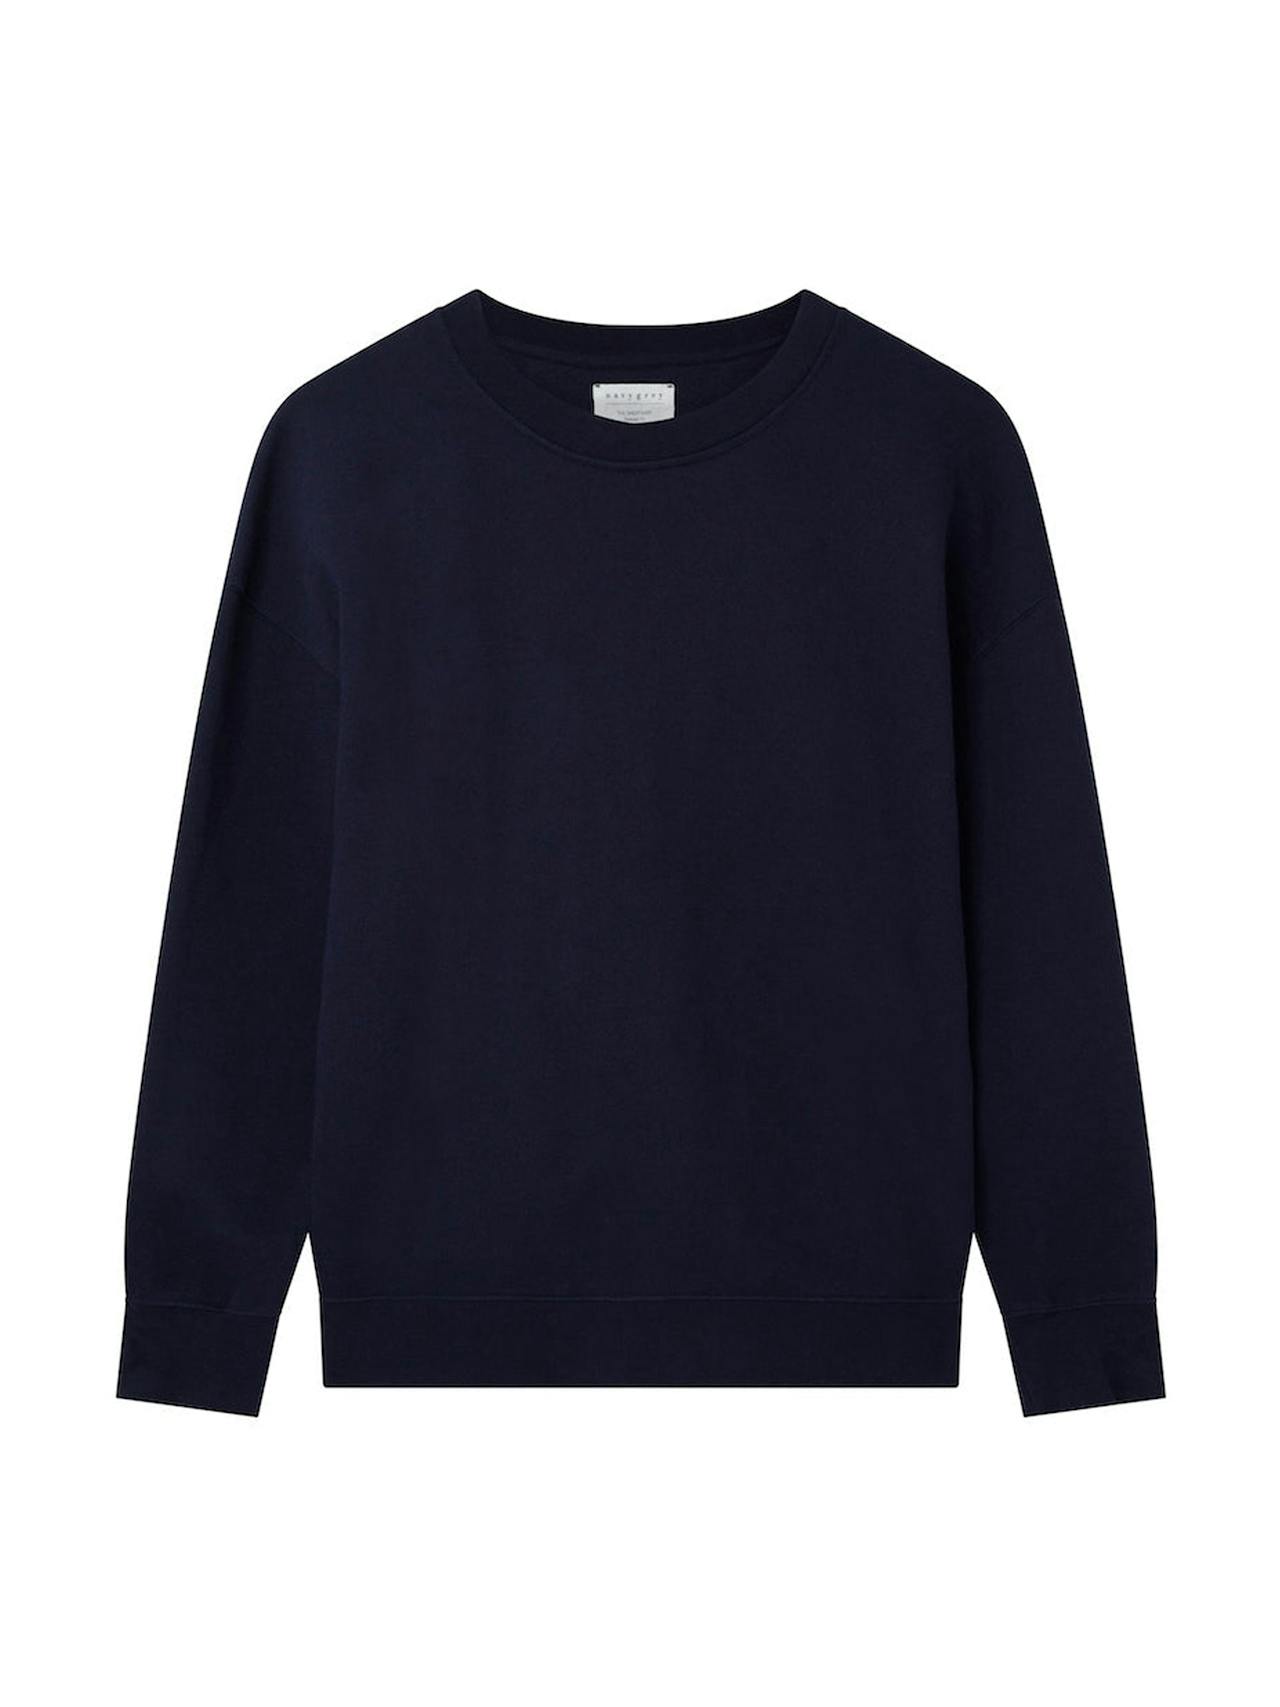 The Relaxed-fit sweatshirt in true navy